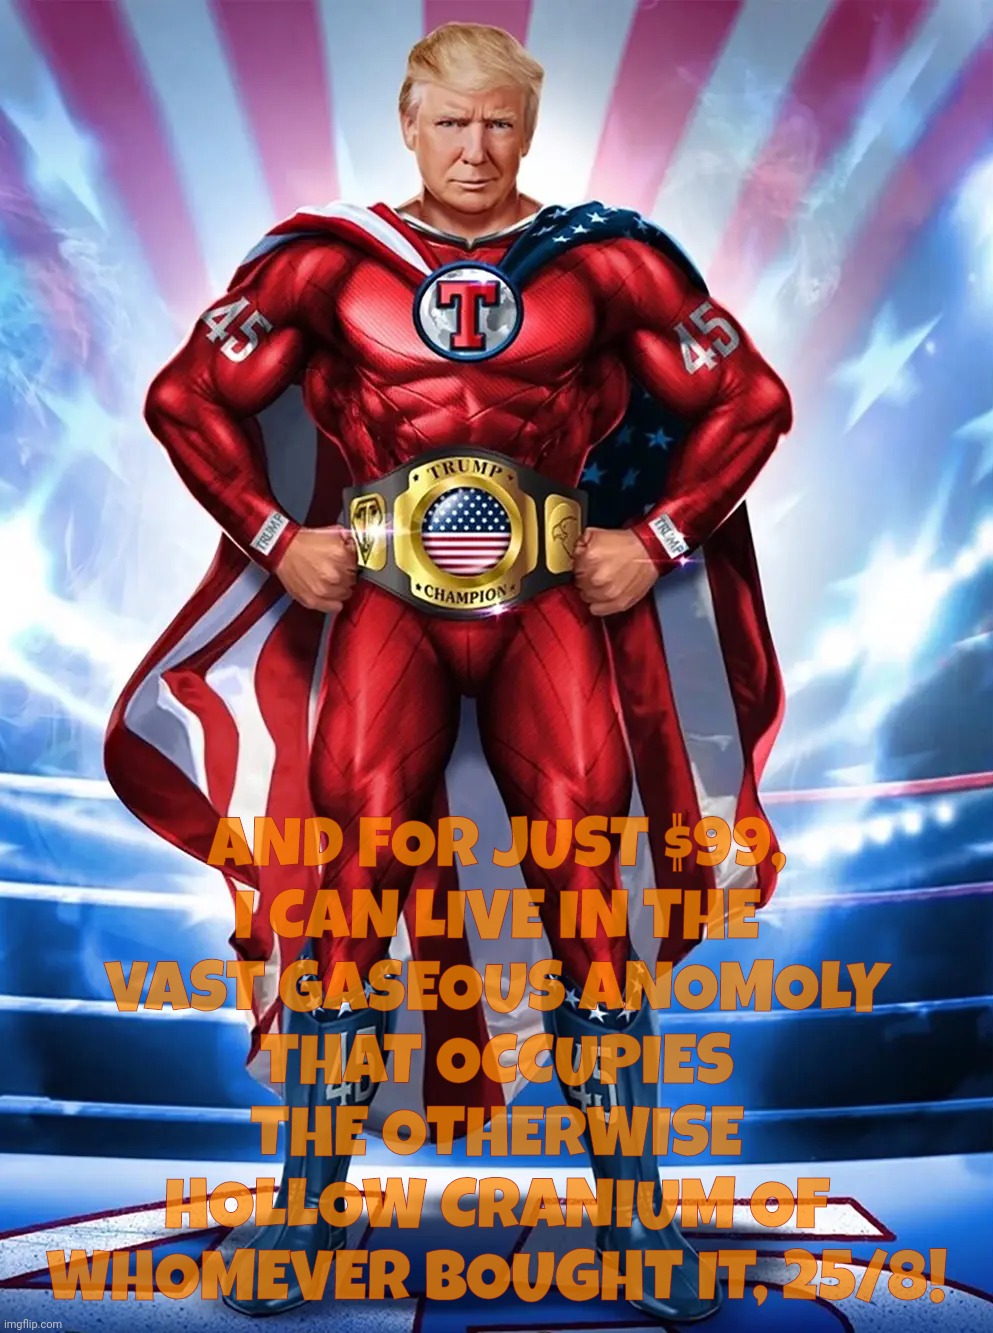 Trump NFT superhero | AND FOR JUST $99,
I CAN LIVE IN THE
VAST GASEOUS ANOMOLY
THAT OCCUPIES THE OTHERWISE HOLLOW CRANIUM OF WHOMEVER BOUGHT IT, 25/8! | image tagged in trump nft superhero | made w/ Imgflip meme maker